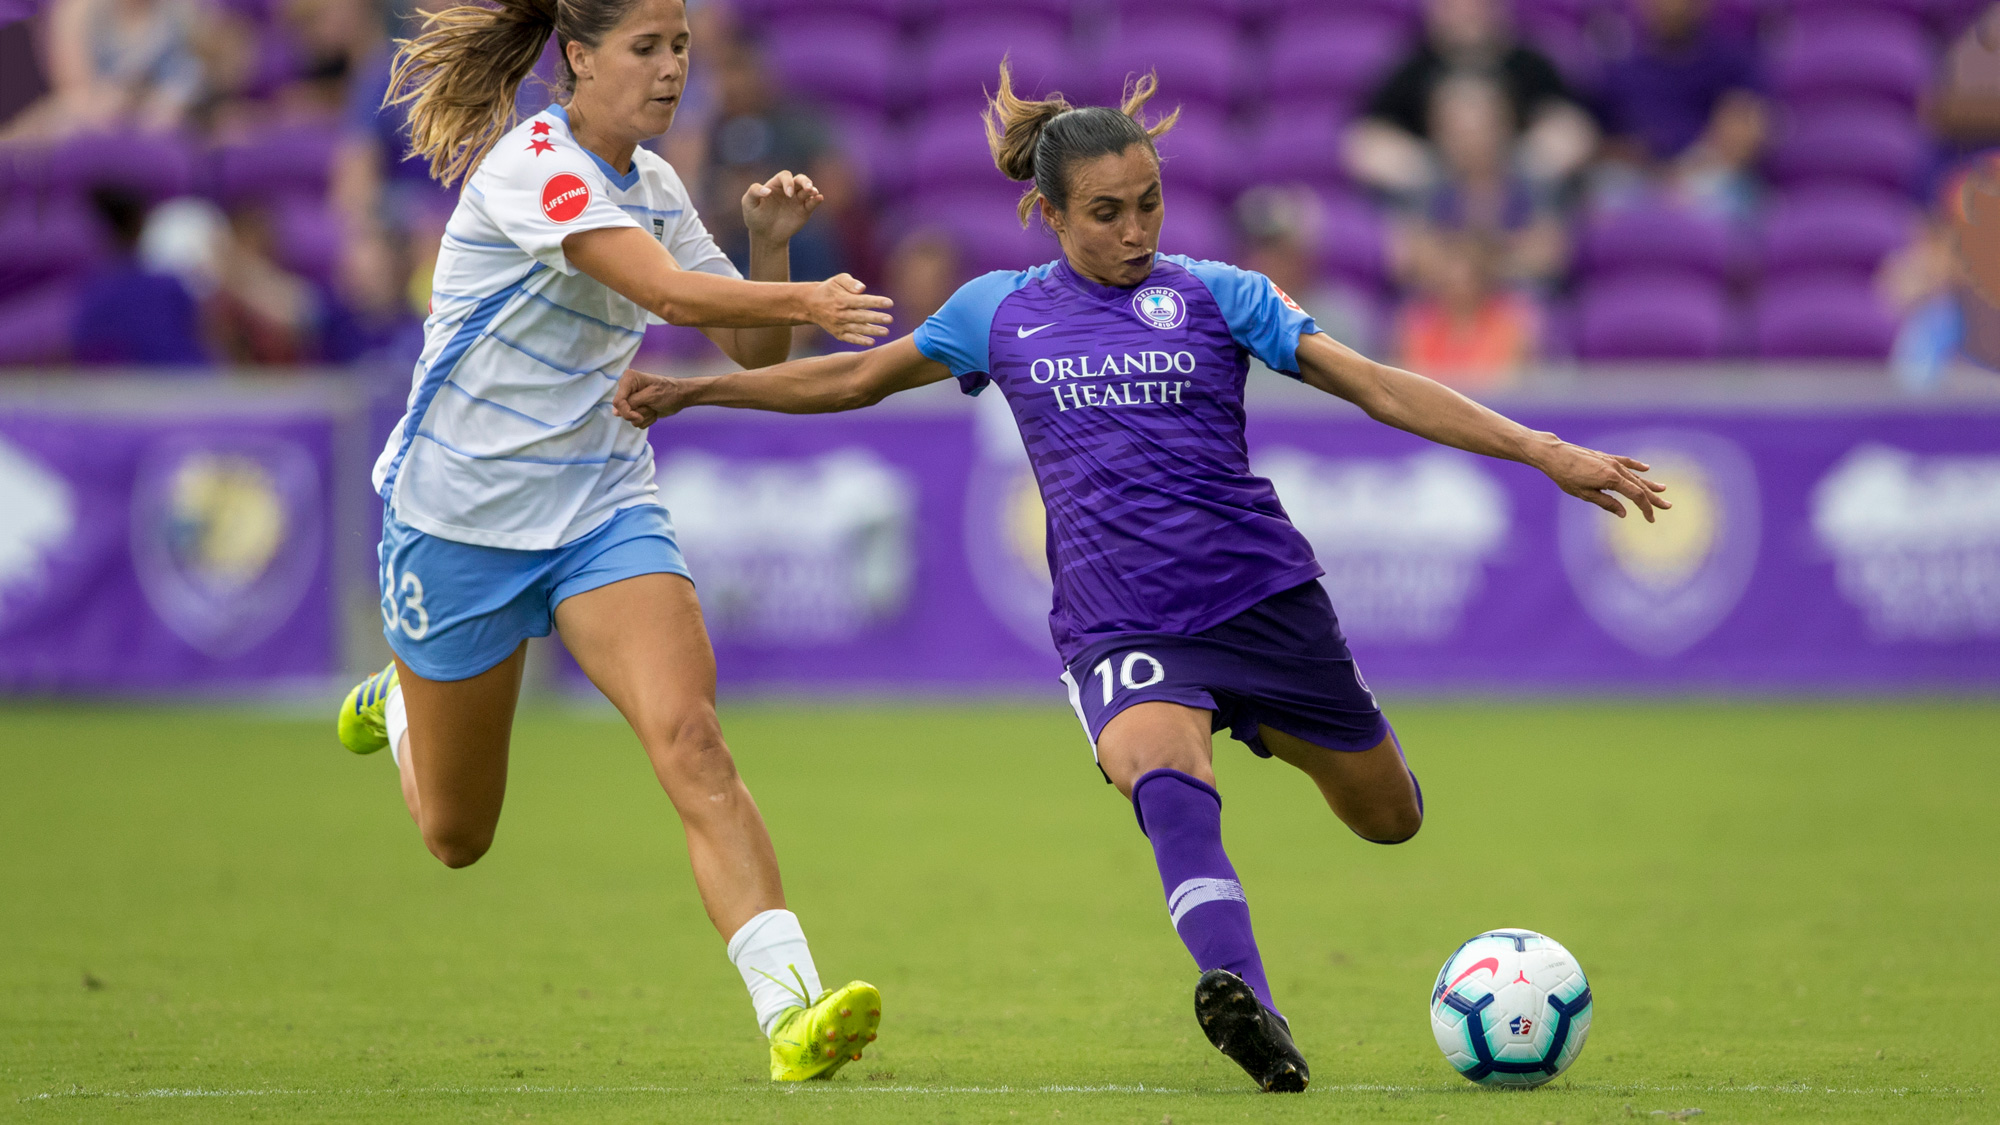 Women's Professional Soccer Live Stream How to Watch NWSL Matches